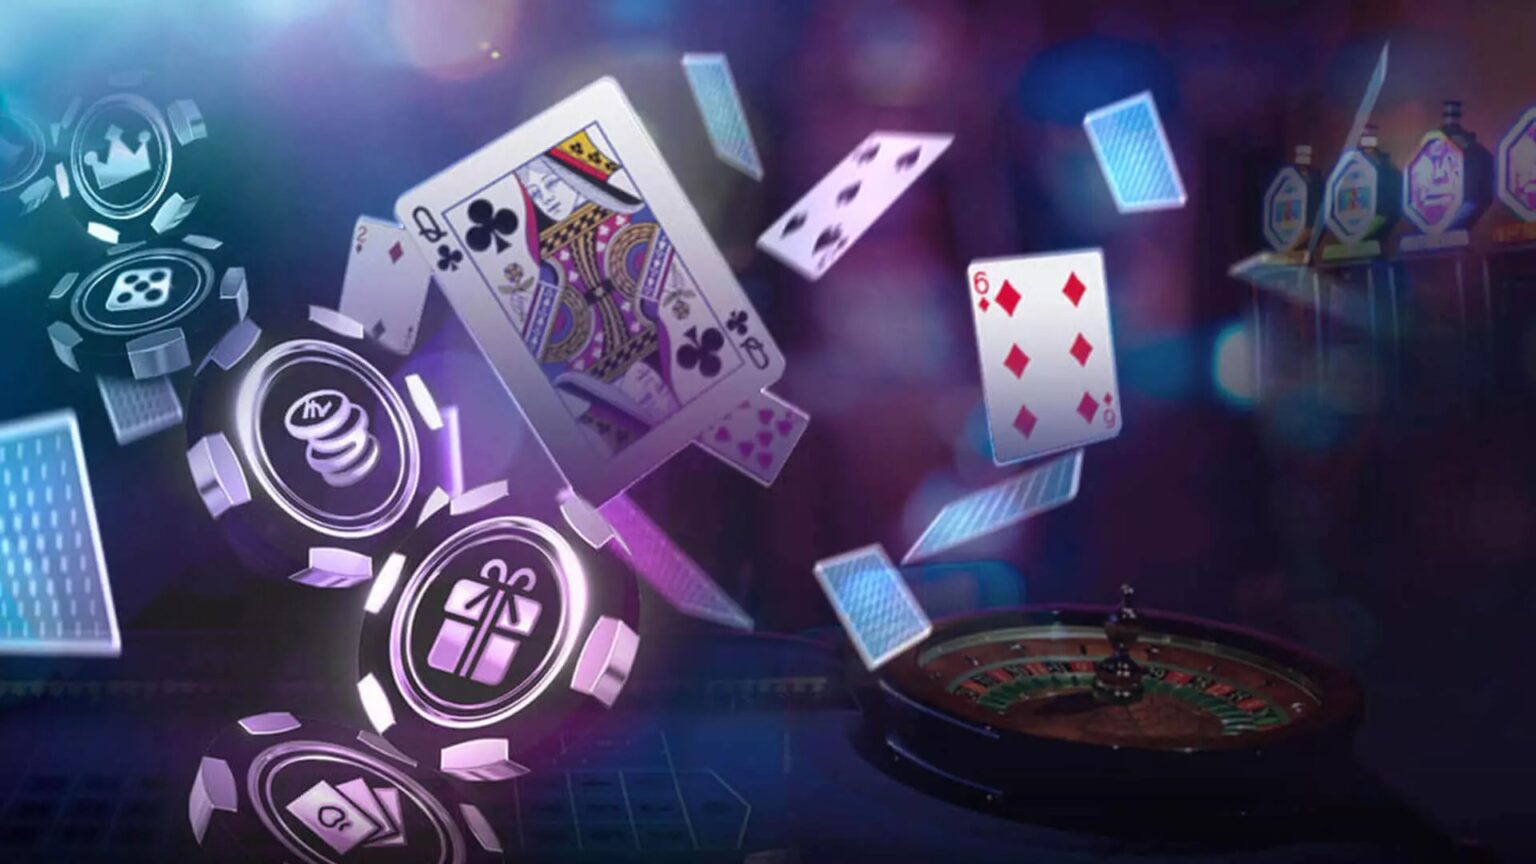 If you're new to online gambling, finding a place to play can be a real challenge. Get some help with this guide to choosing a trusted online casino.